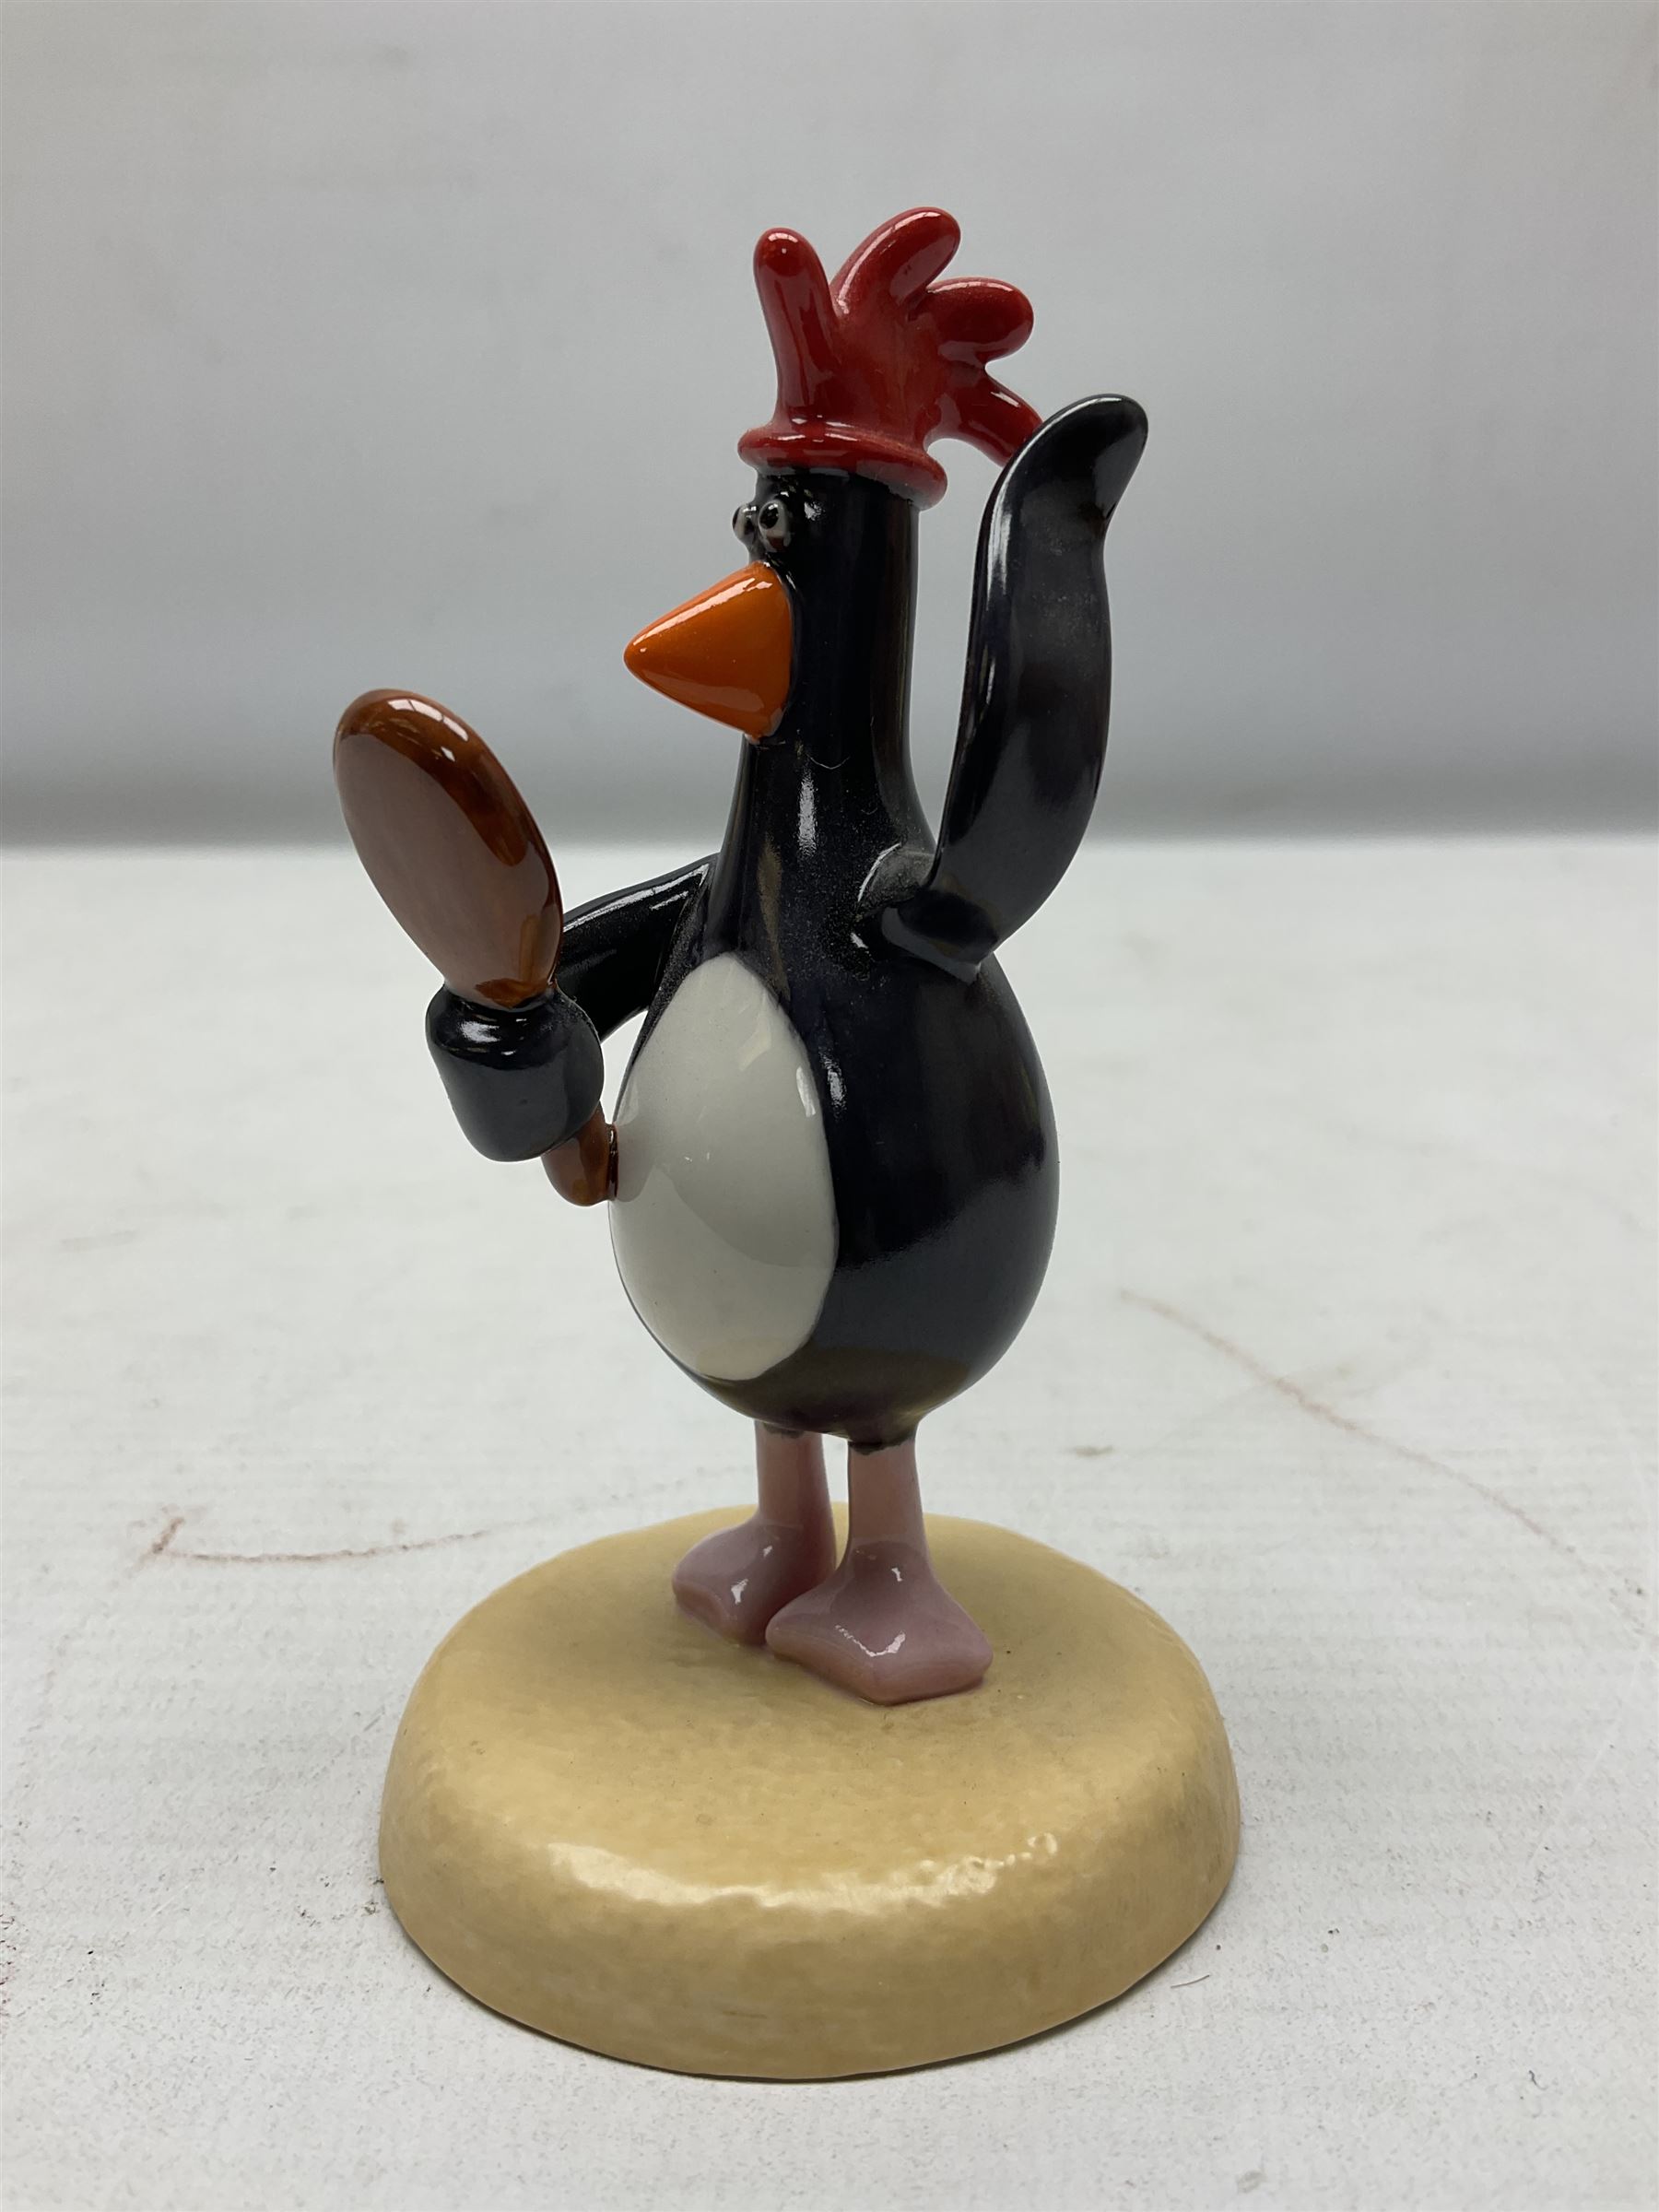 A Vintage 2003 Feathers Mcgraw Coalport Figurine Mint Condition With Box. 